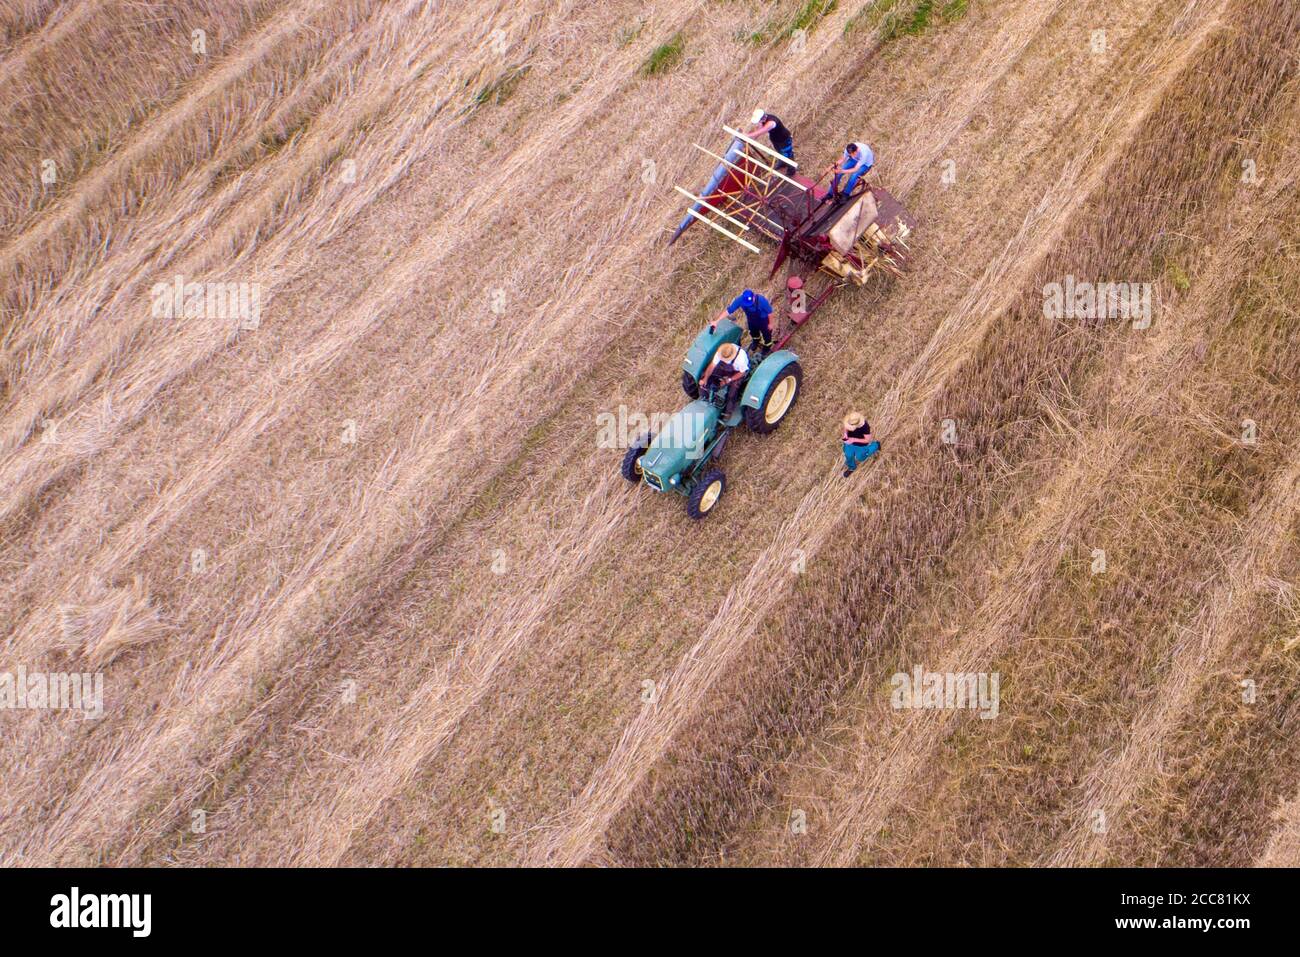 01 August 2020, Schleswig-Holstein, Lübeck: A swath mower is used to mow and bind yarrows of straw when harvesting rye straw for the production of drinking straws in the field near Lübeck. (Aerial photograph with a drone) From July 2021 at the latest, plastic drinking straws may no longer be sold throughout the EU. As an alternative to the colourful drinking straws made of plastic, special rye is harvested on an area of two hectares near Lübeck and drinking straws are made from it. For many years Strohmi GmbH has been supplying these sustainable straws to hotels, upscale bars and restaurants a Stock Photo